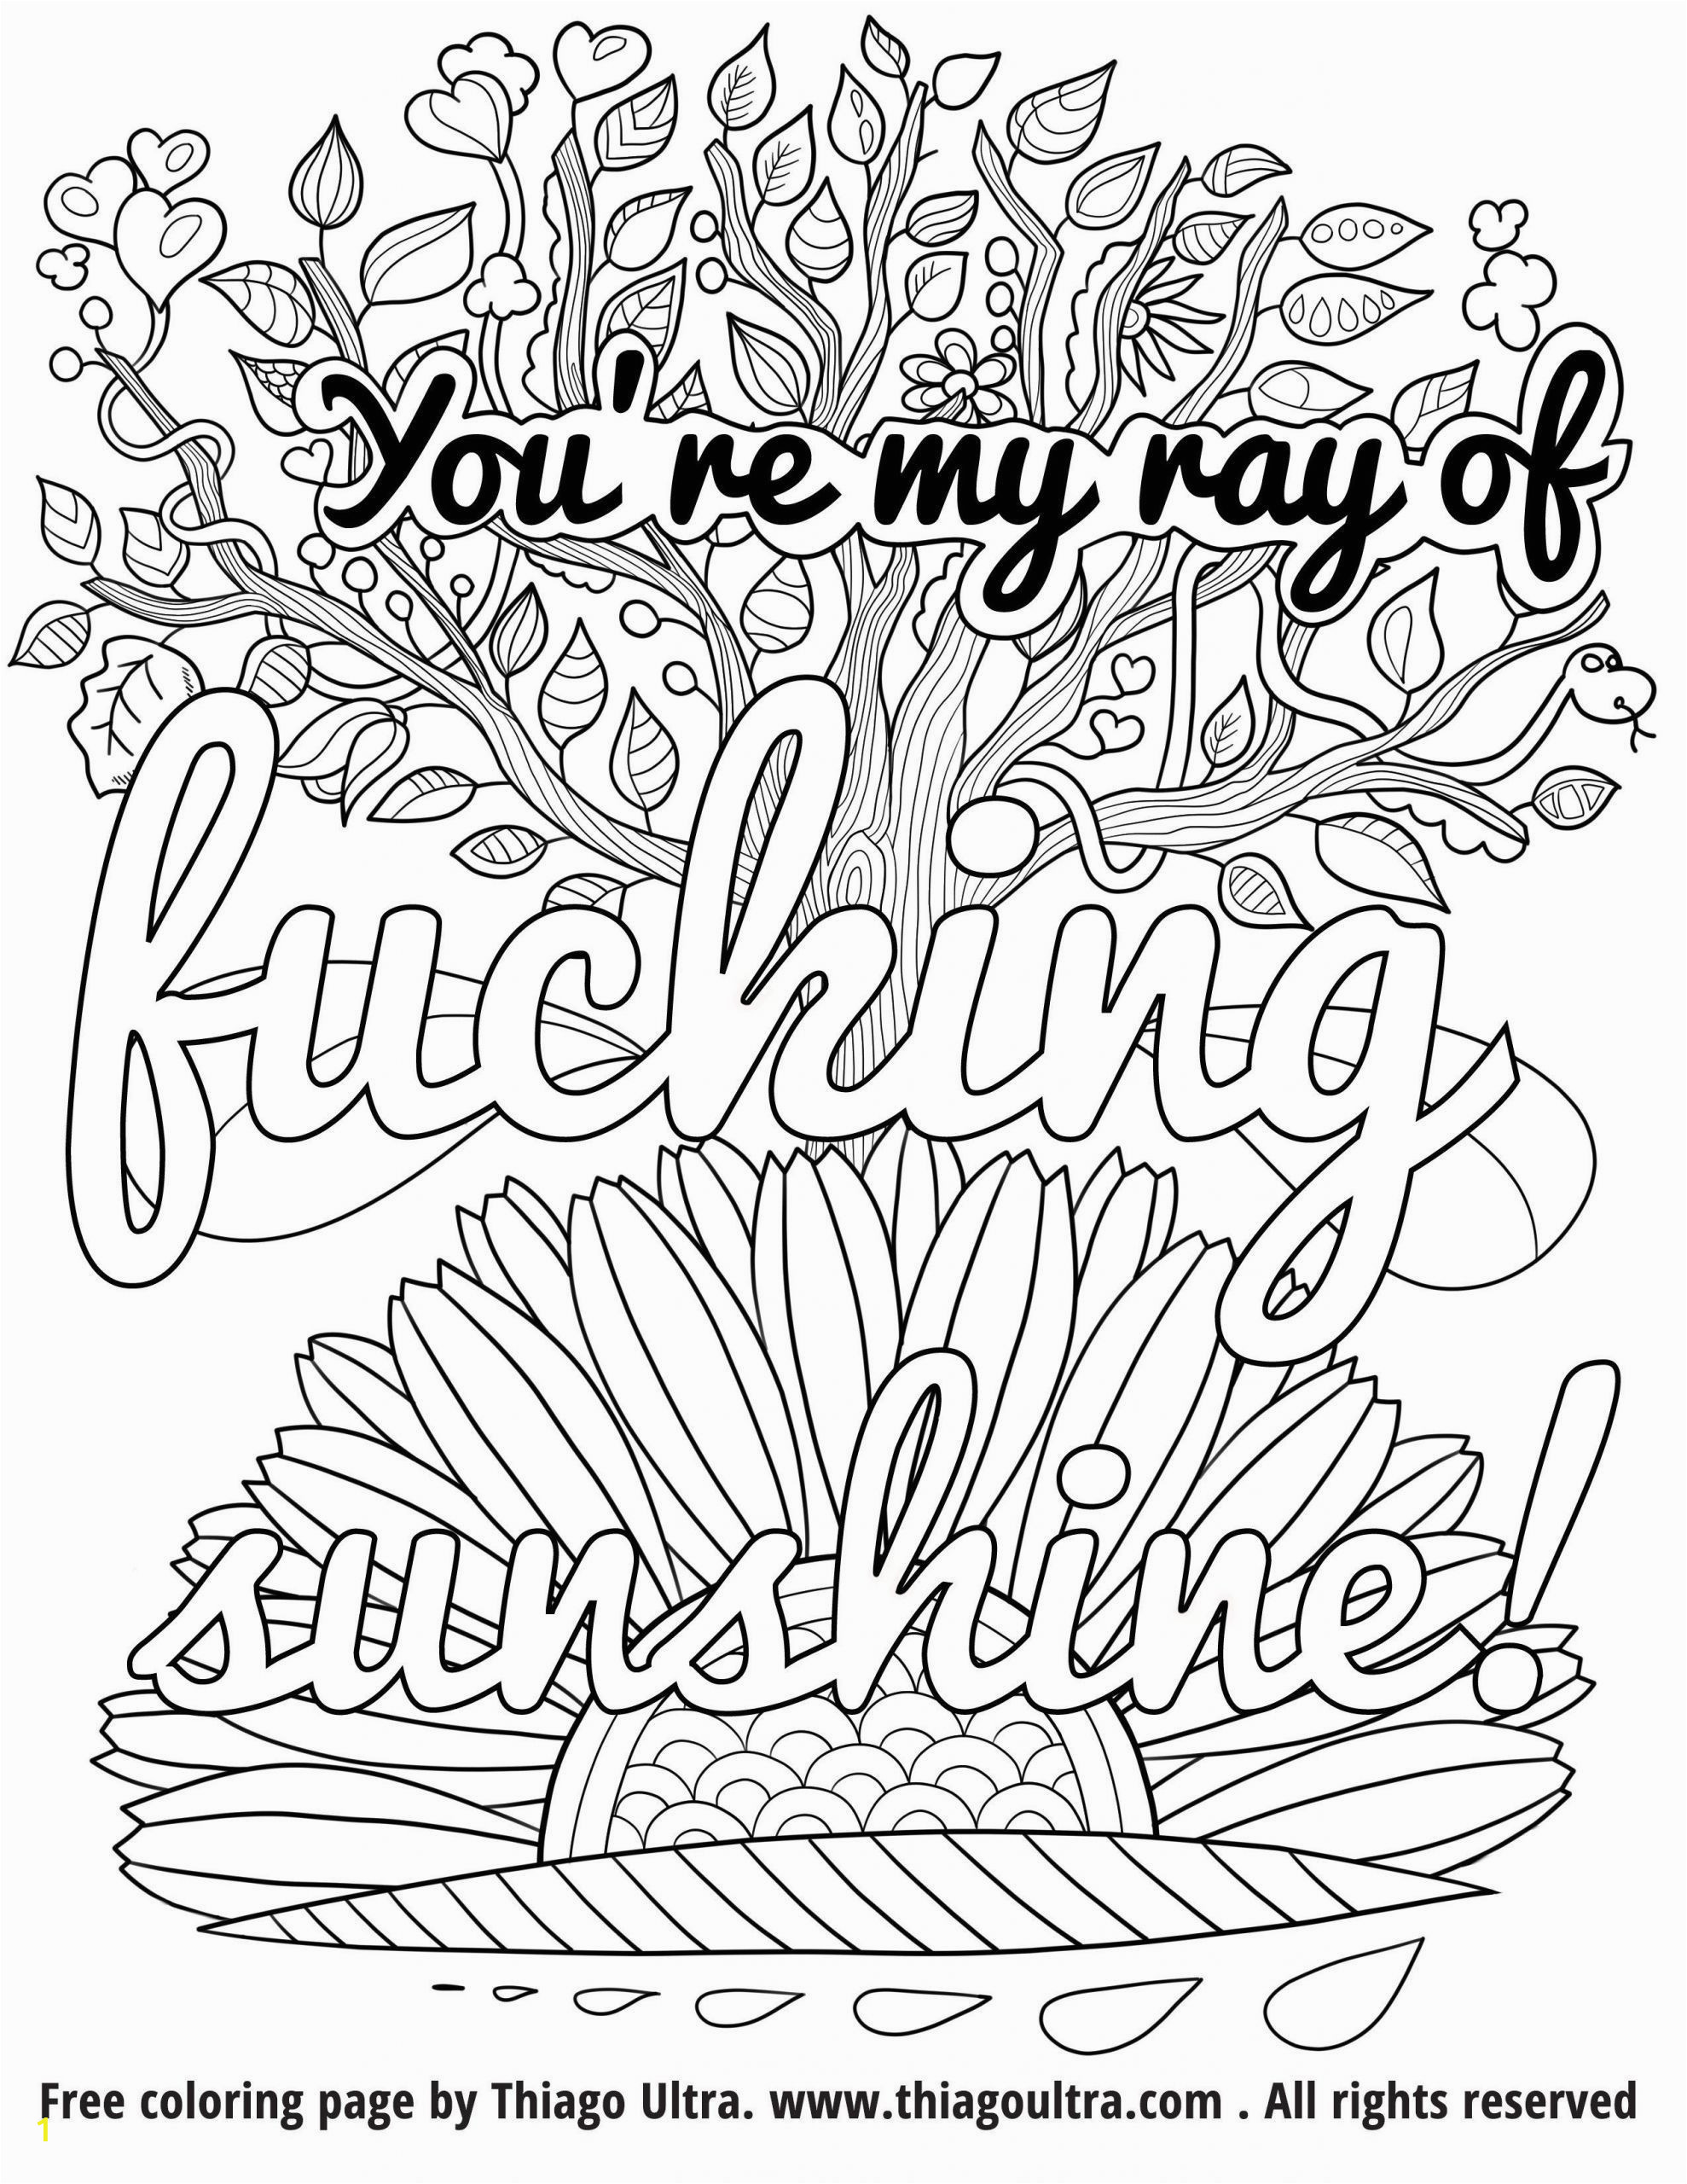 Free Printable Coloring Pages for Adults Inspirational Quotes Coloring Pages Coloring Pages for Adults Swear Words